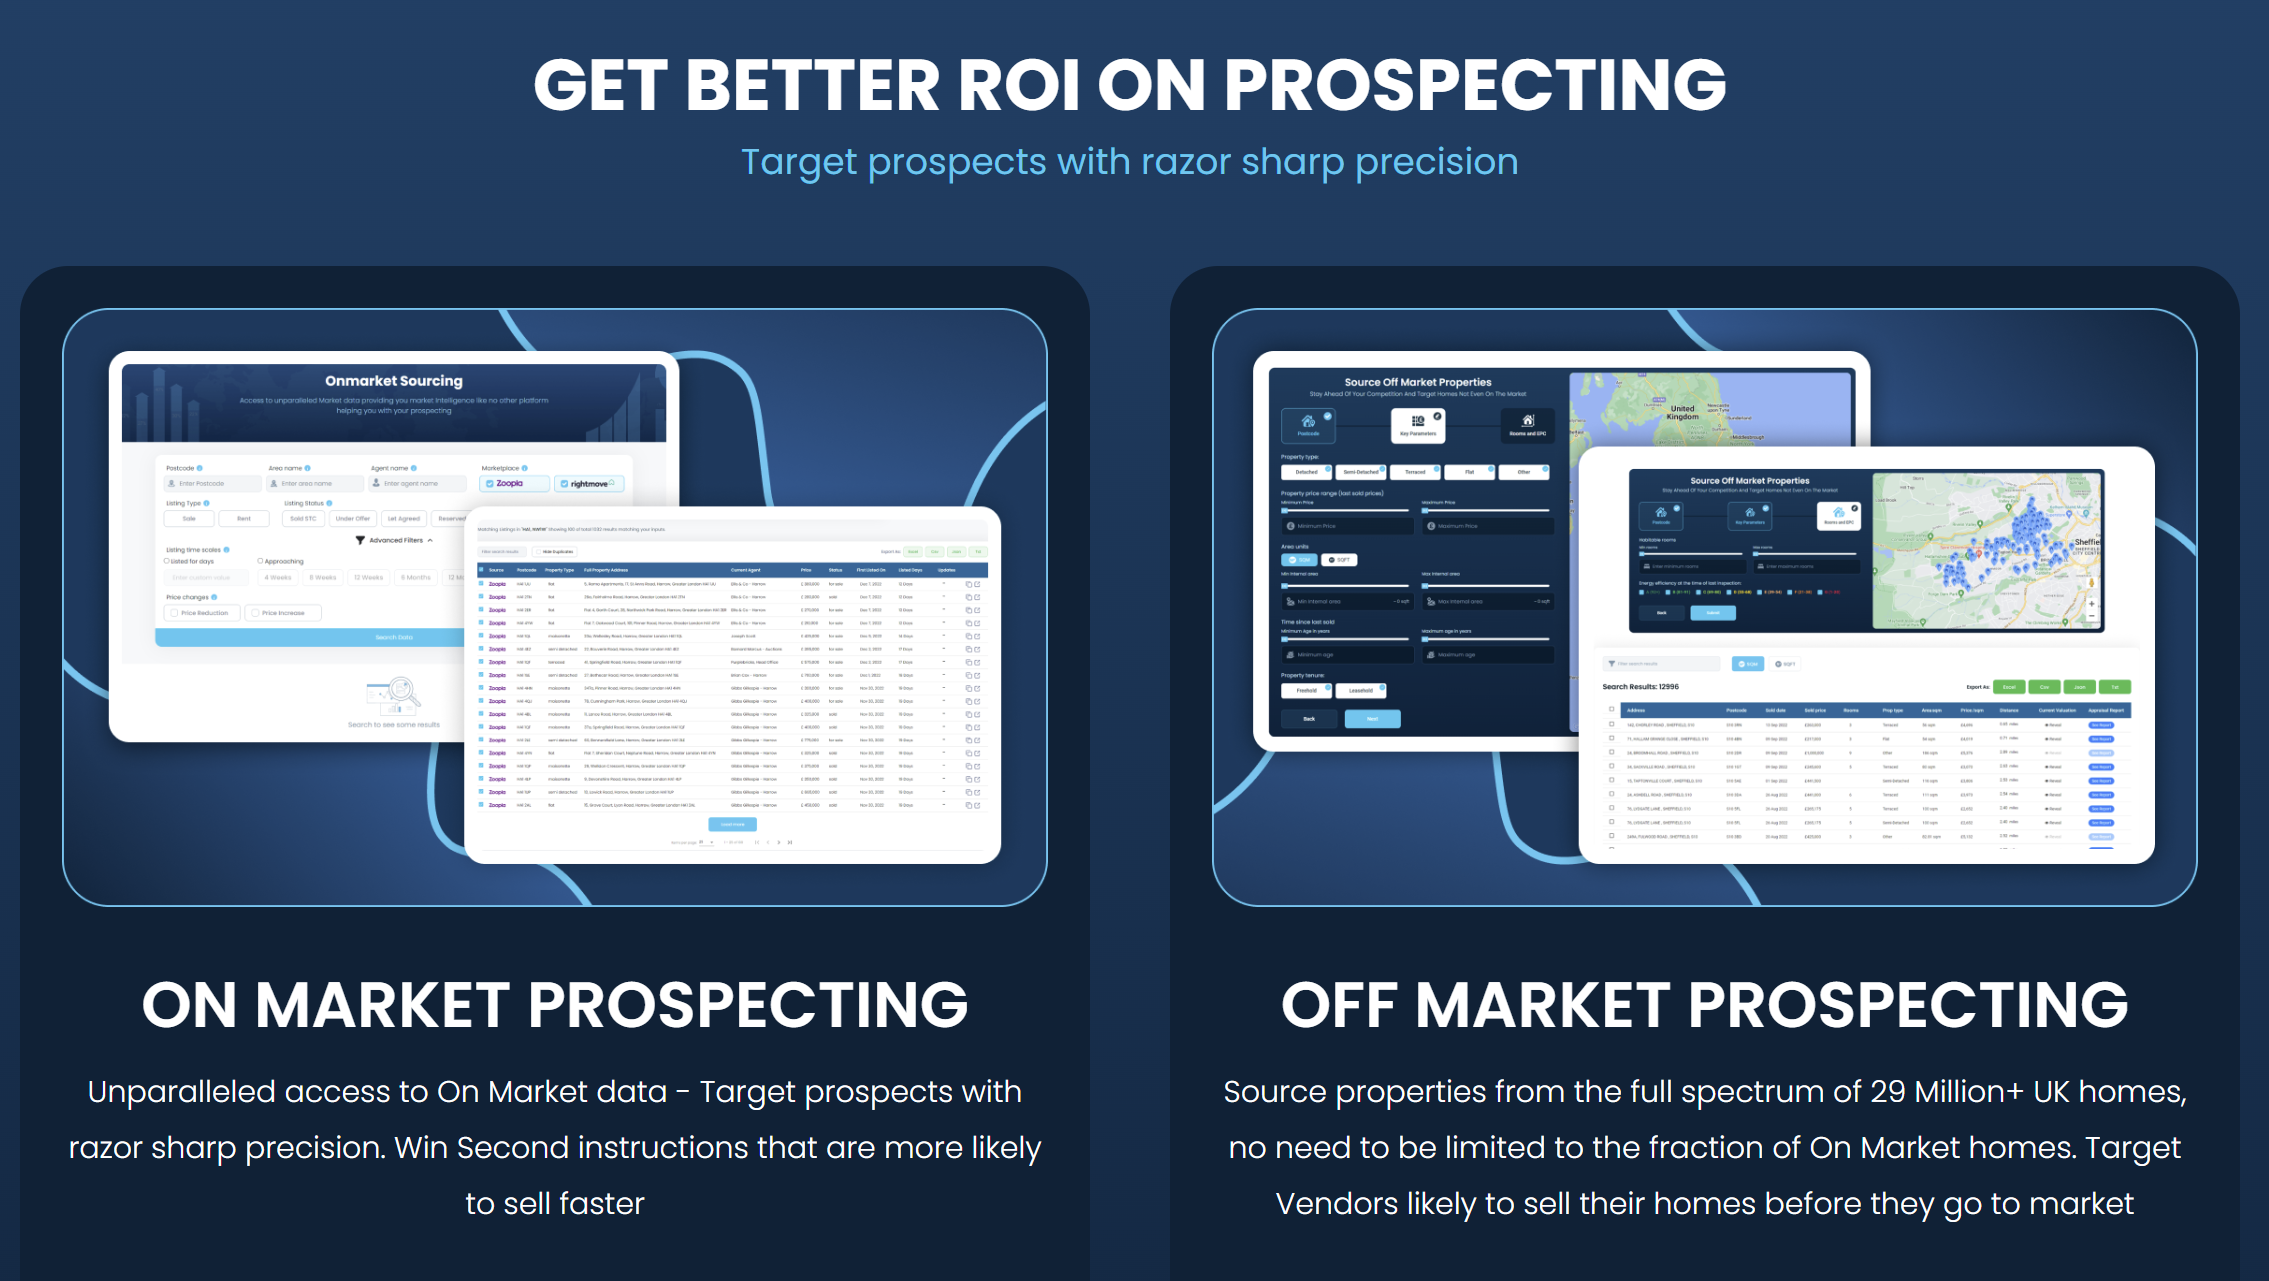 PDI Prospecting On and Off Market